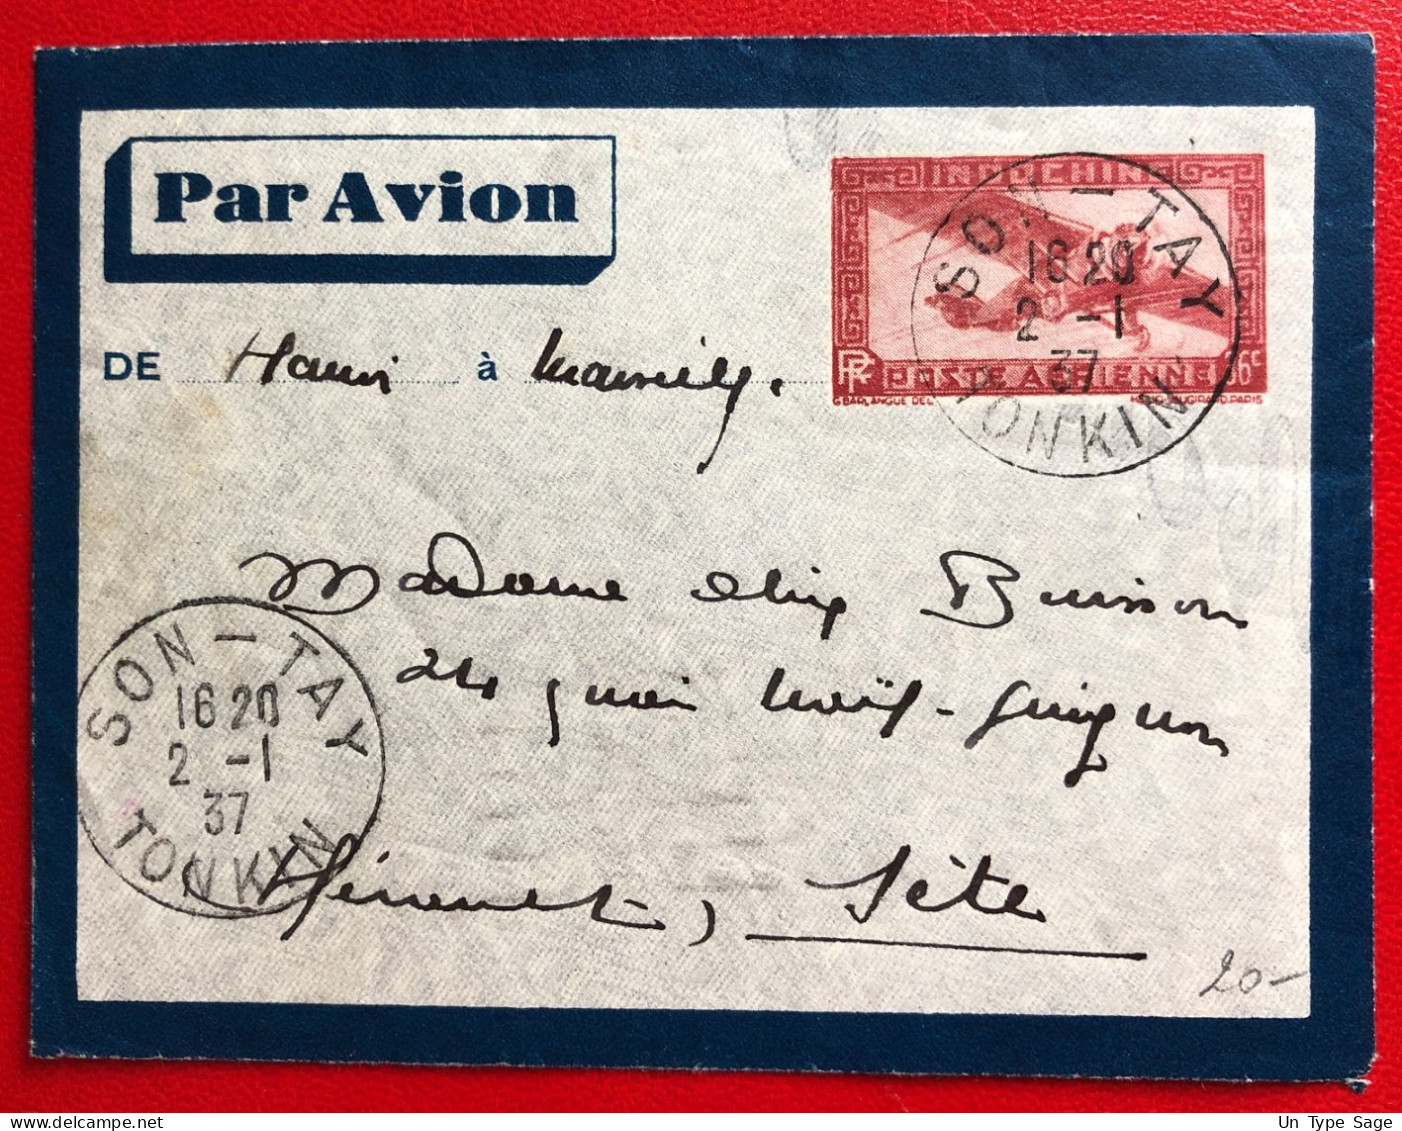 Indochine, Entier-Avion TAD SON-TAY, Tonkin, 2.1.1937, Pour La France - (A736) - Covers & Documents